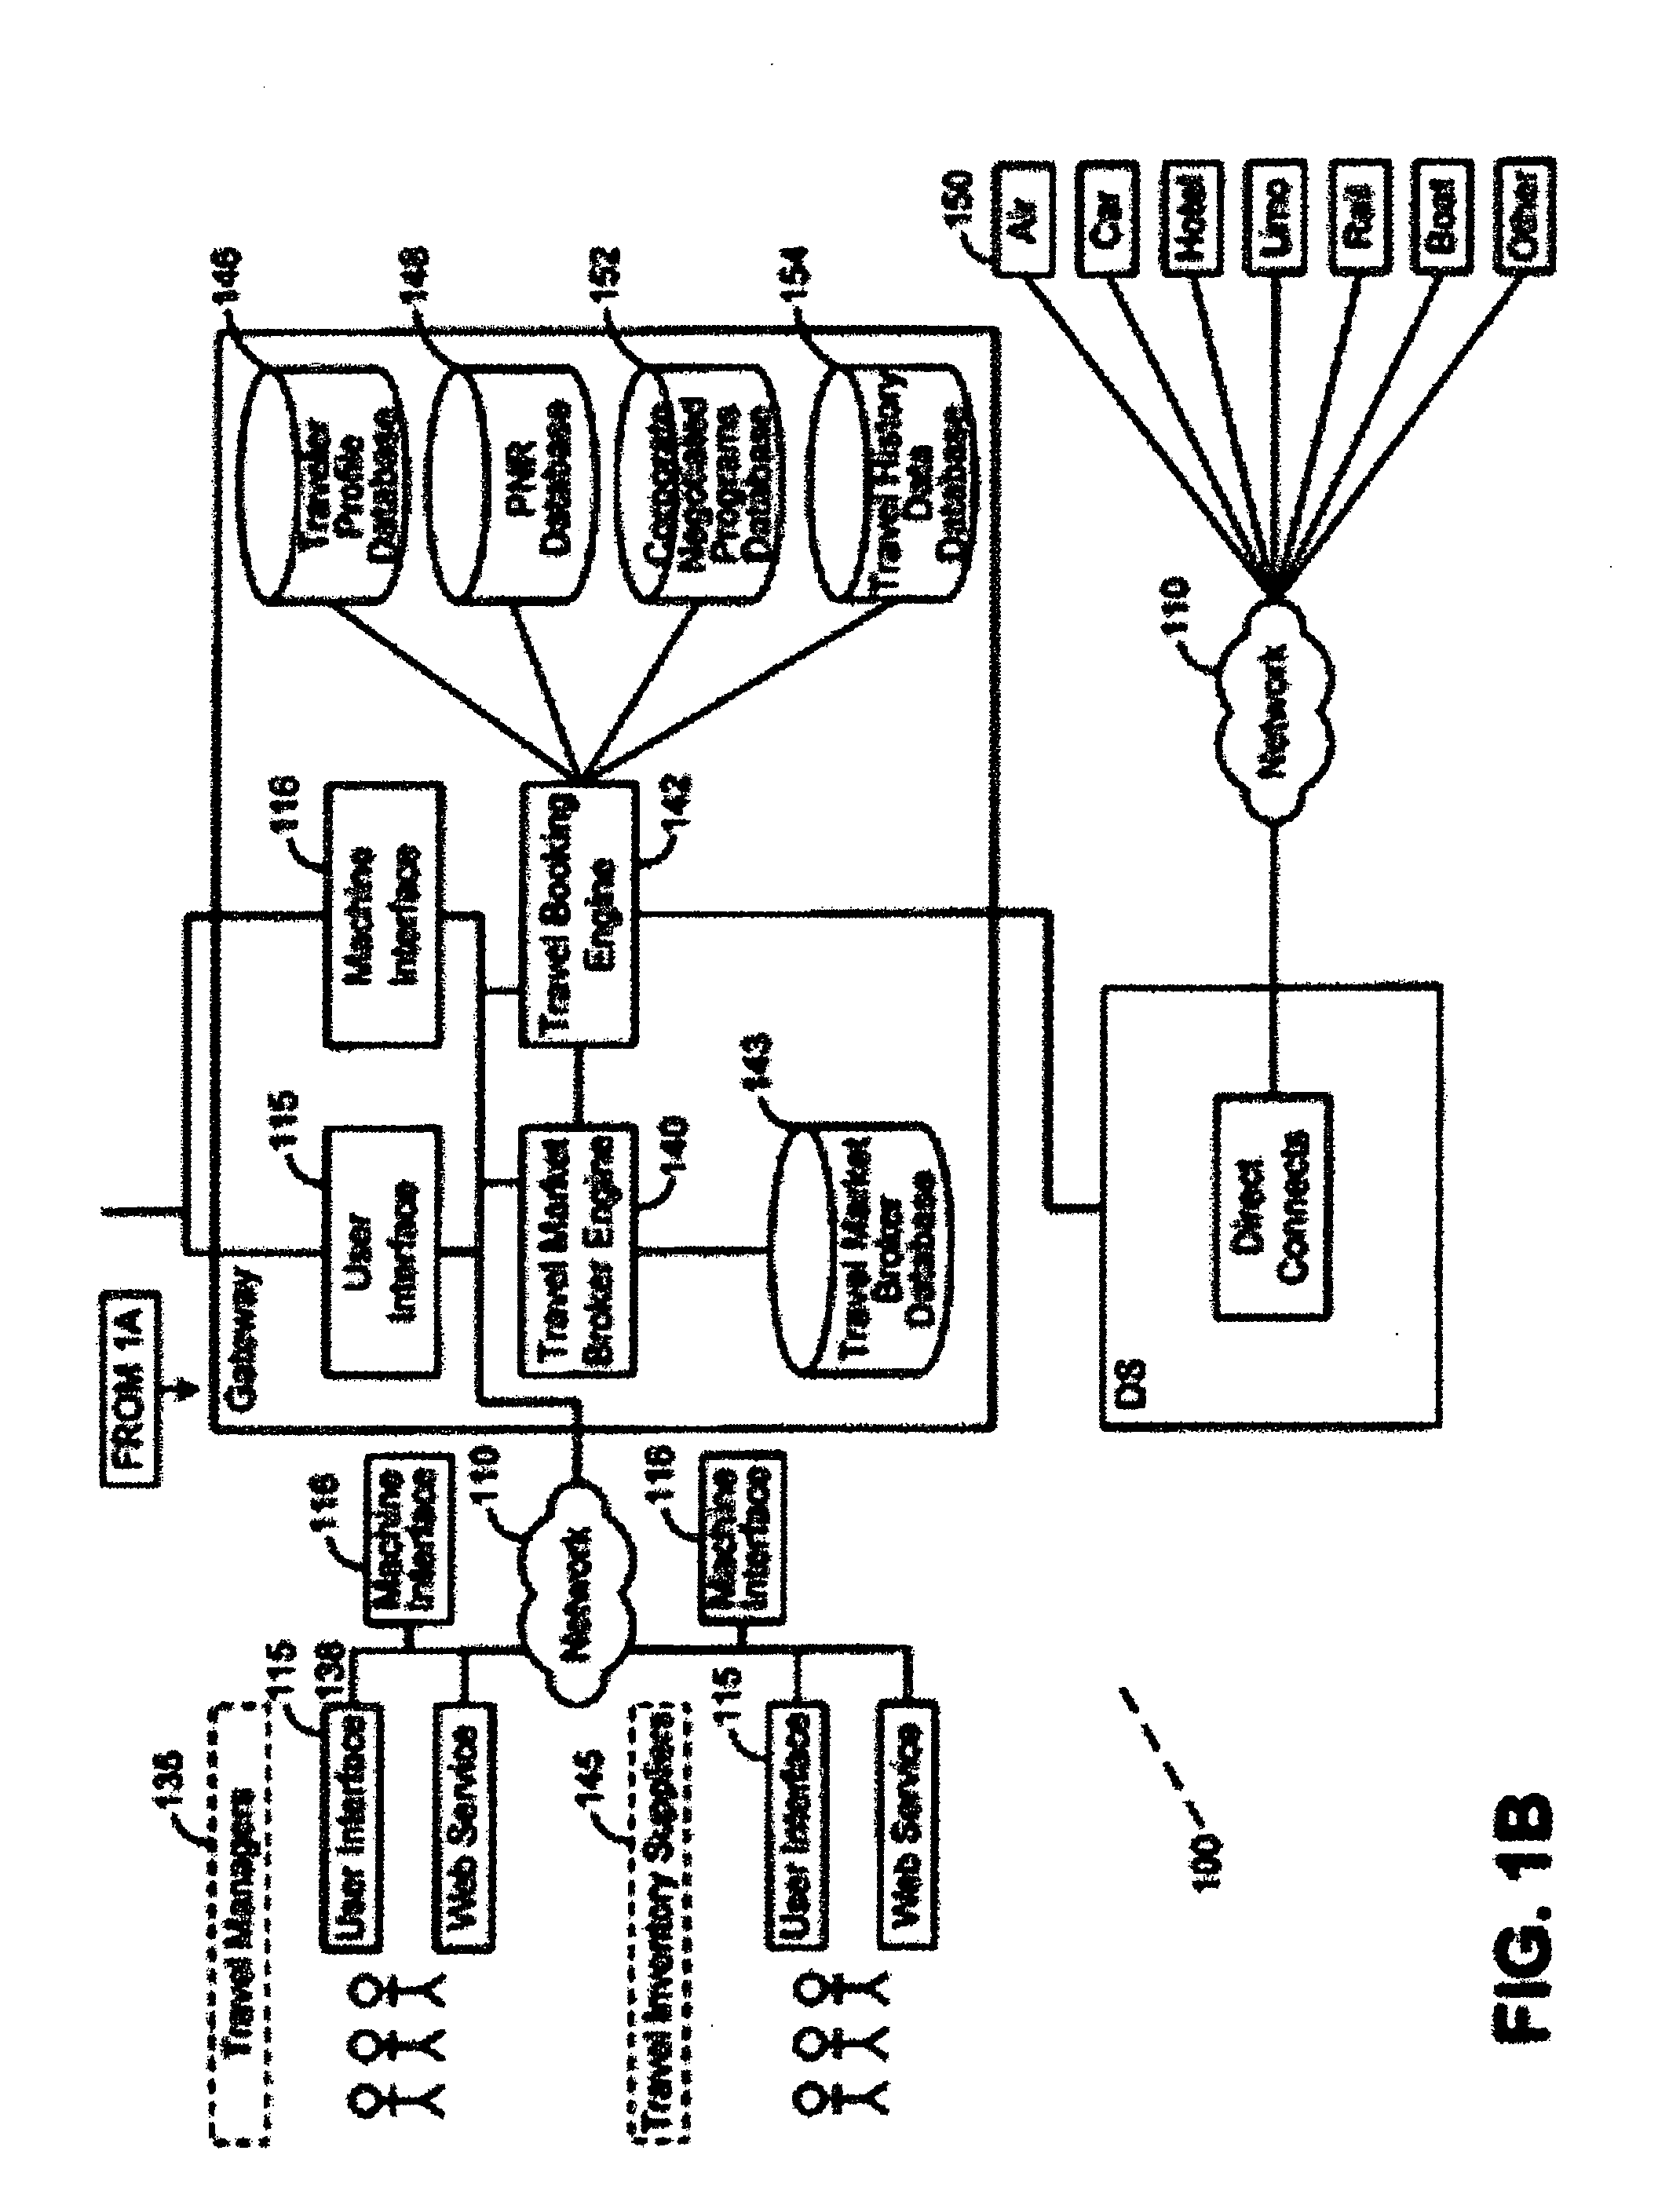 Travel service broker system and method